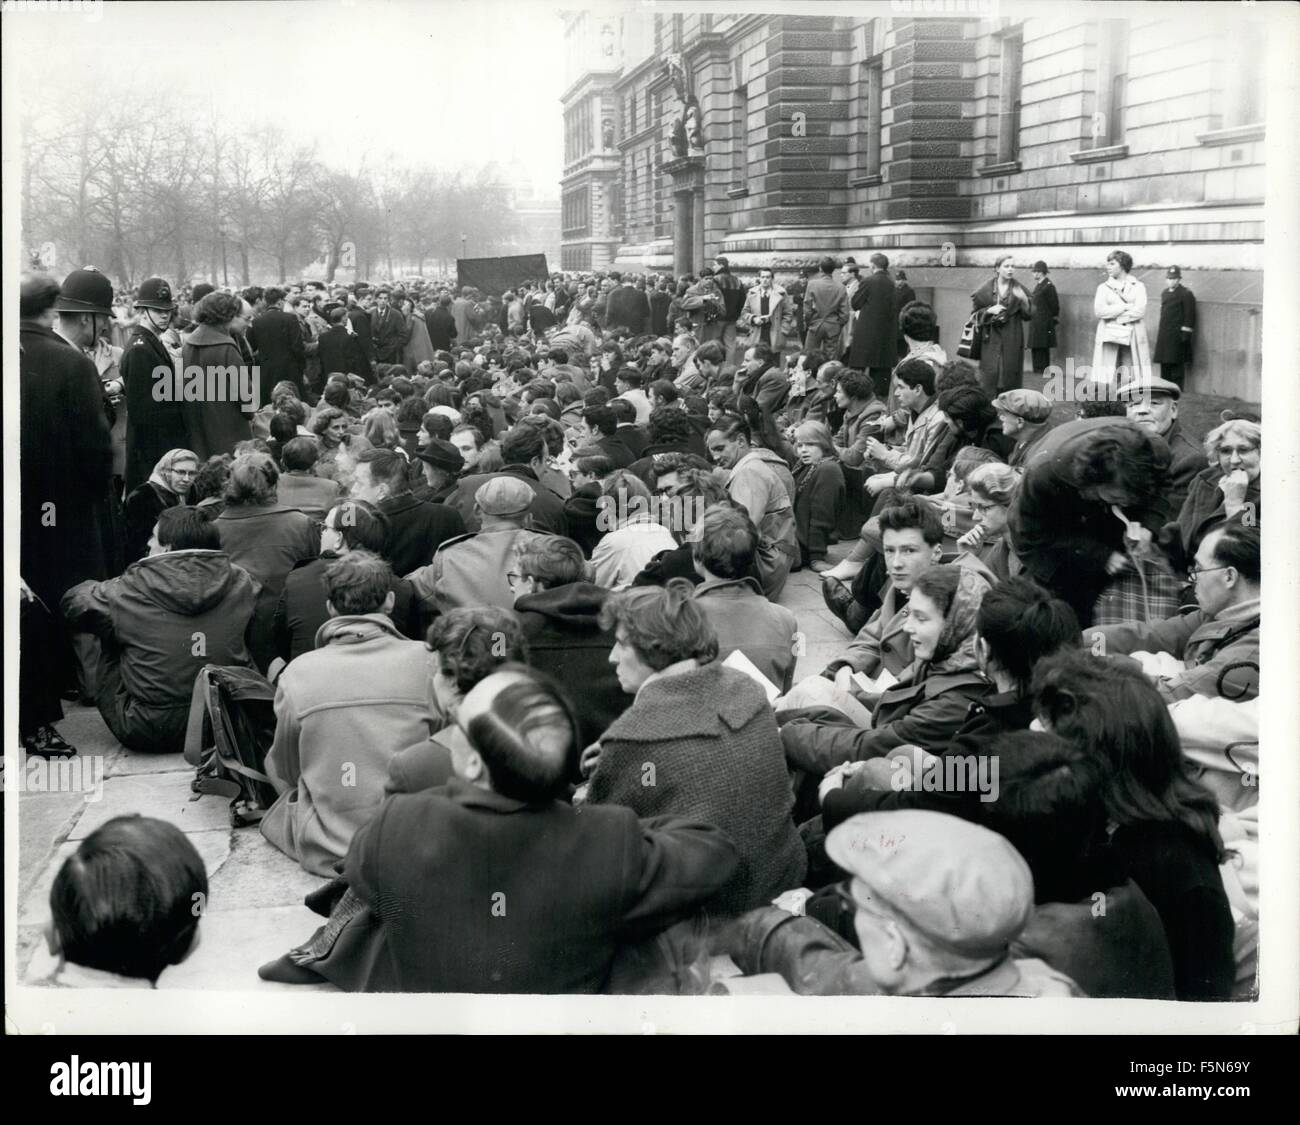 1960 - Earl Russell in ''sit down'' H-bomn protest.: The 88-year old philosopher, Earl Russell, this afternoon led a ''sit-down'' demonstration against nuclear weapons, outside the Ministry of Defence, in Whitehall. The demonstration was organised by the Committee of 100 to press home their demand for the immediate scrapping of the Polaris agreement with the U.S. The U.S. Depot Ship carrying Polaris missiles is expected in the Clyde today. The Committee of 100 was formed in October 1960, in response to an appeal by Earl Russell and Rev. Michael Scott, and its purpose is to organise non-violent Stock Photo